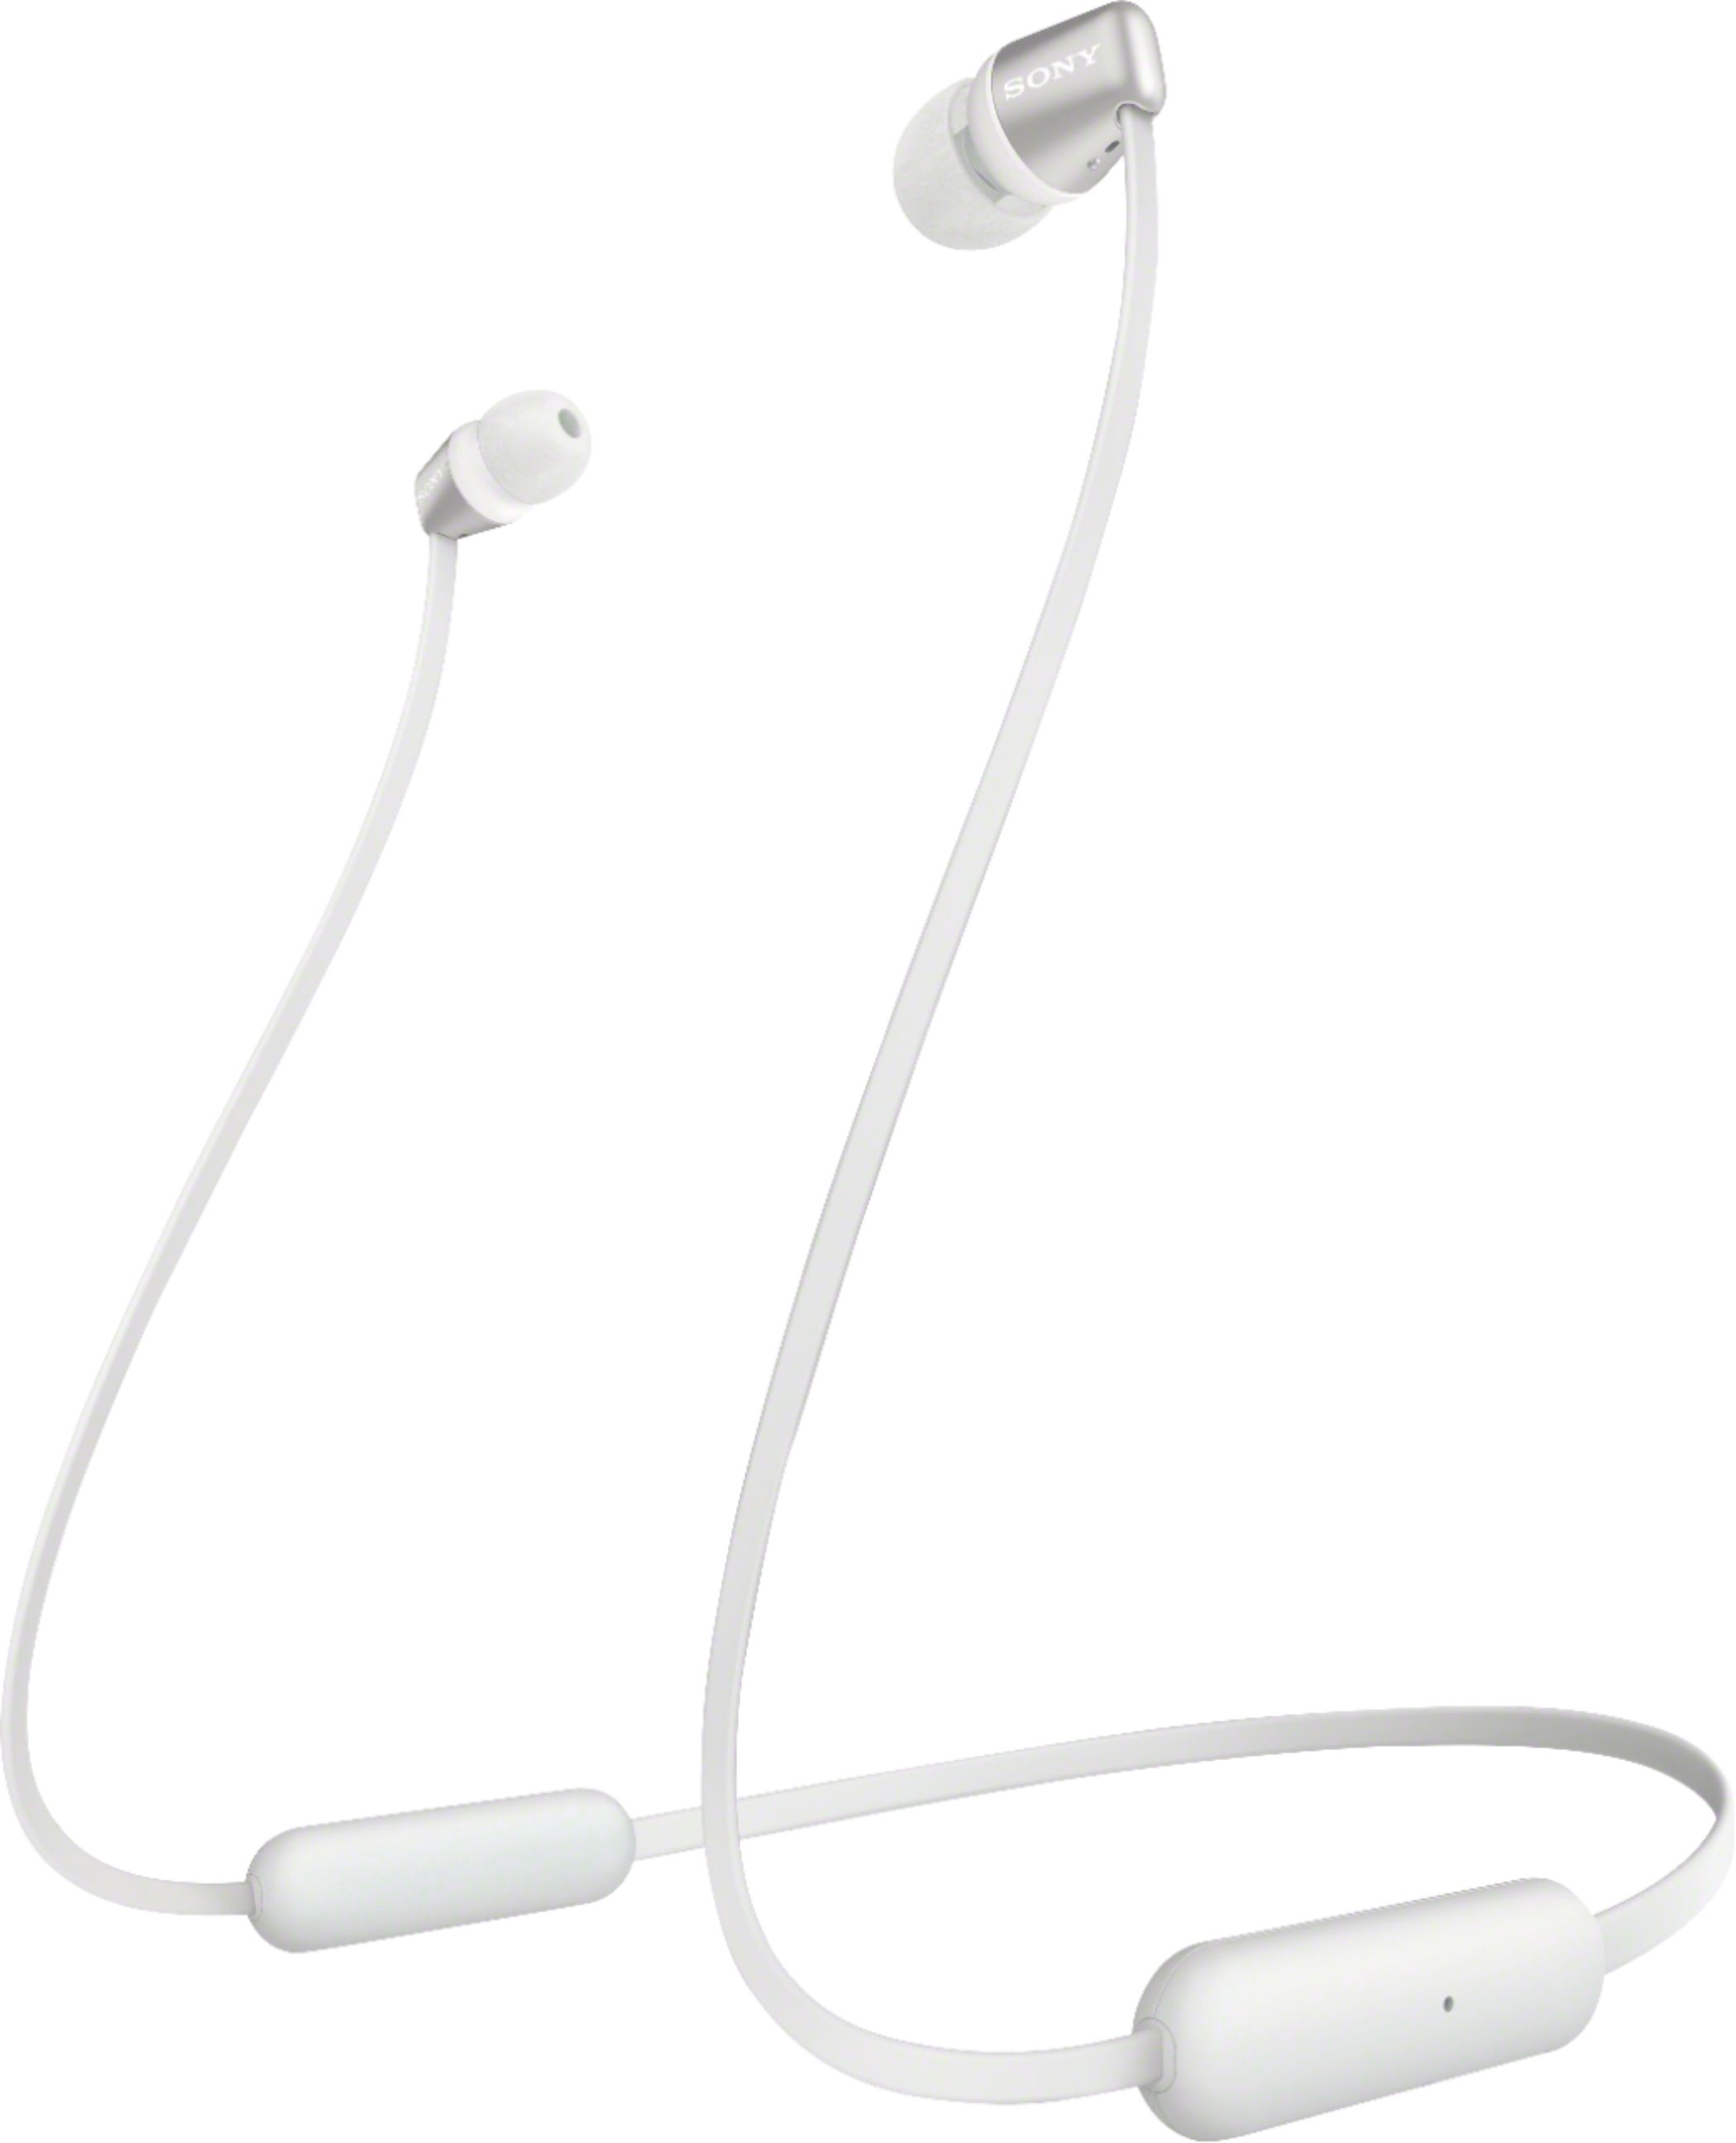 Angle View: Sony - WI-C310 Wireless In-Ear Headphones - White